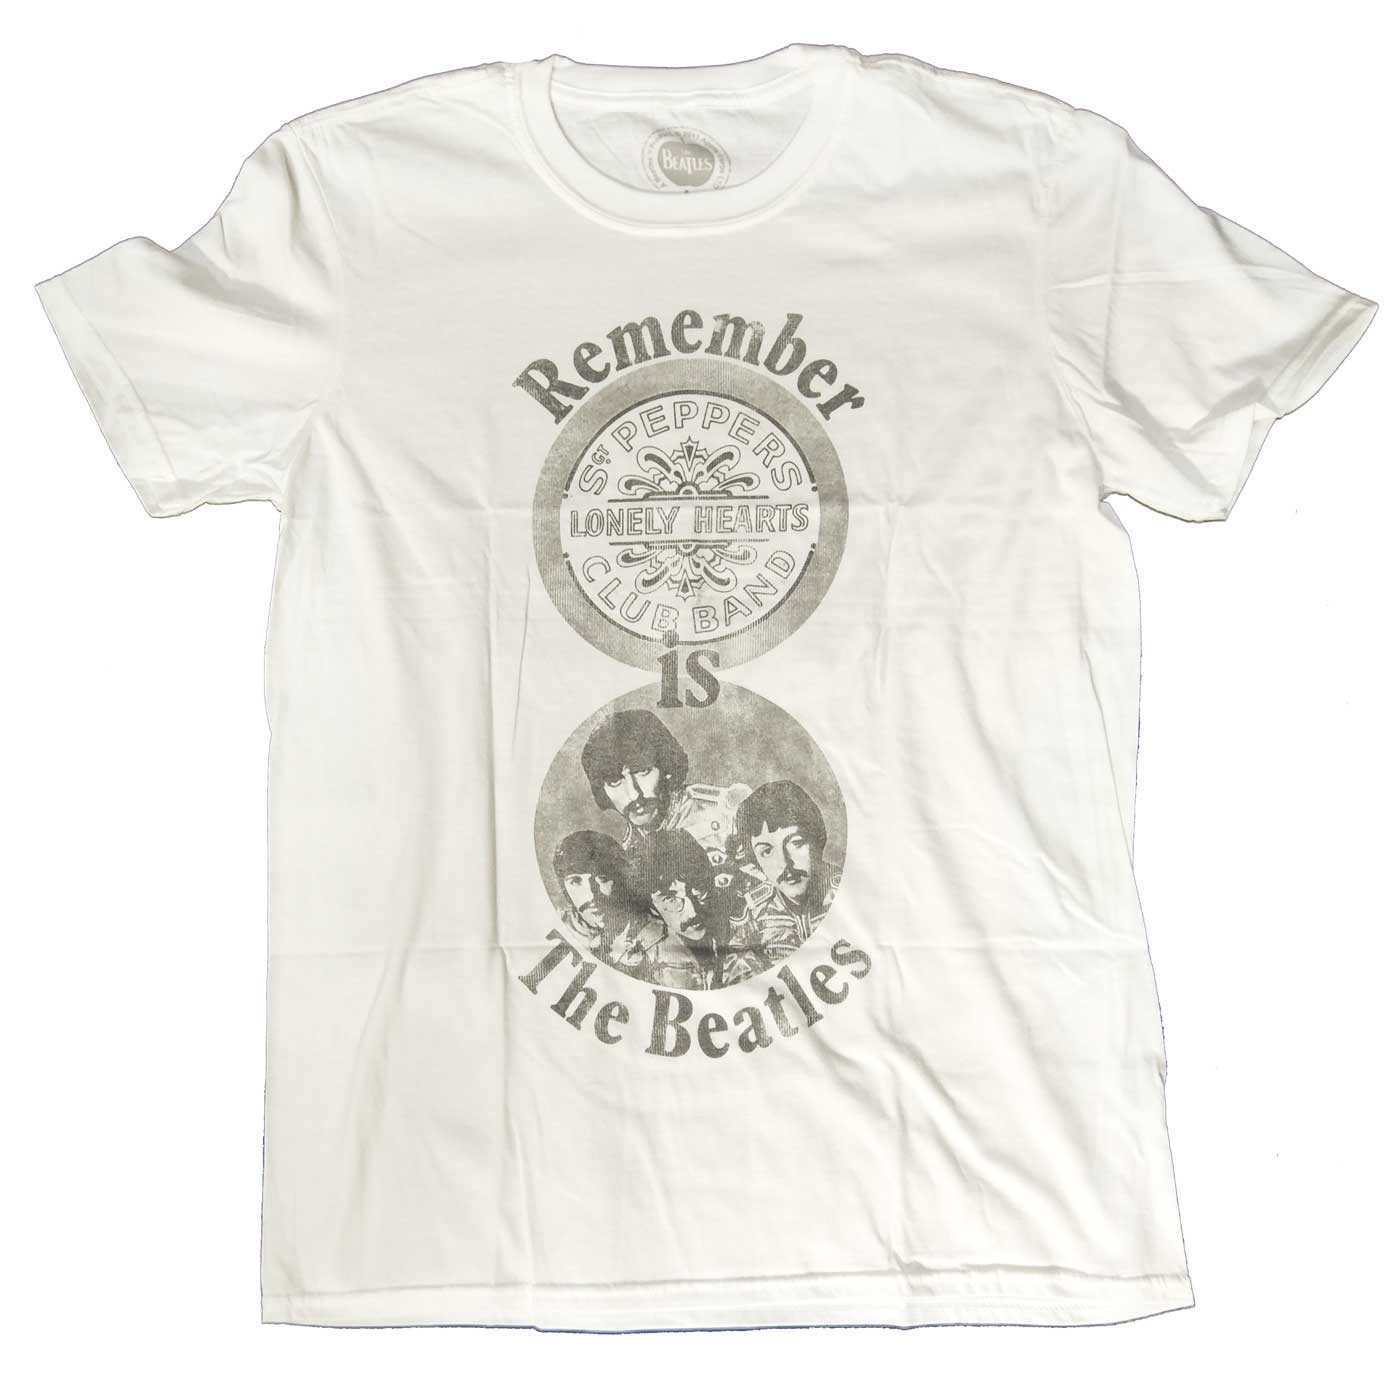 The Beatles T Shirt - Remember Sgt Pepper Is The Beatles 100% official Merchandise